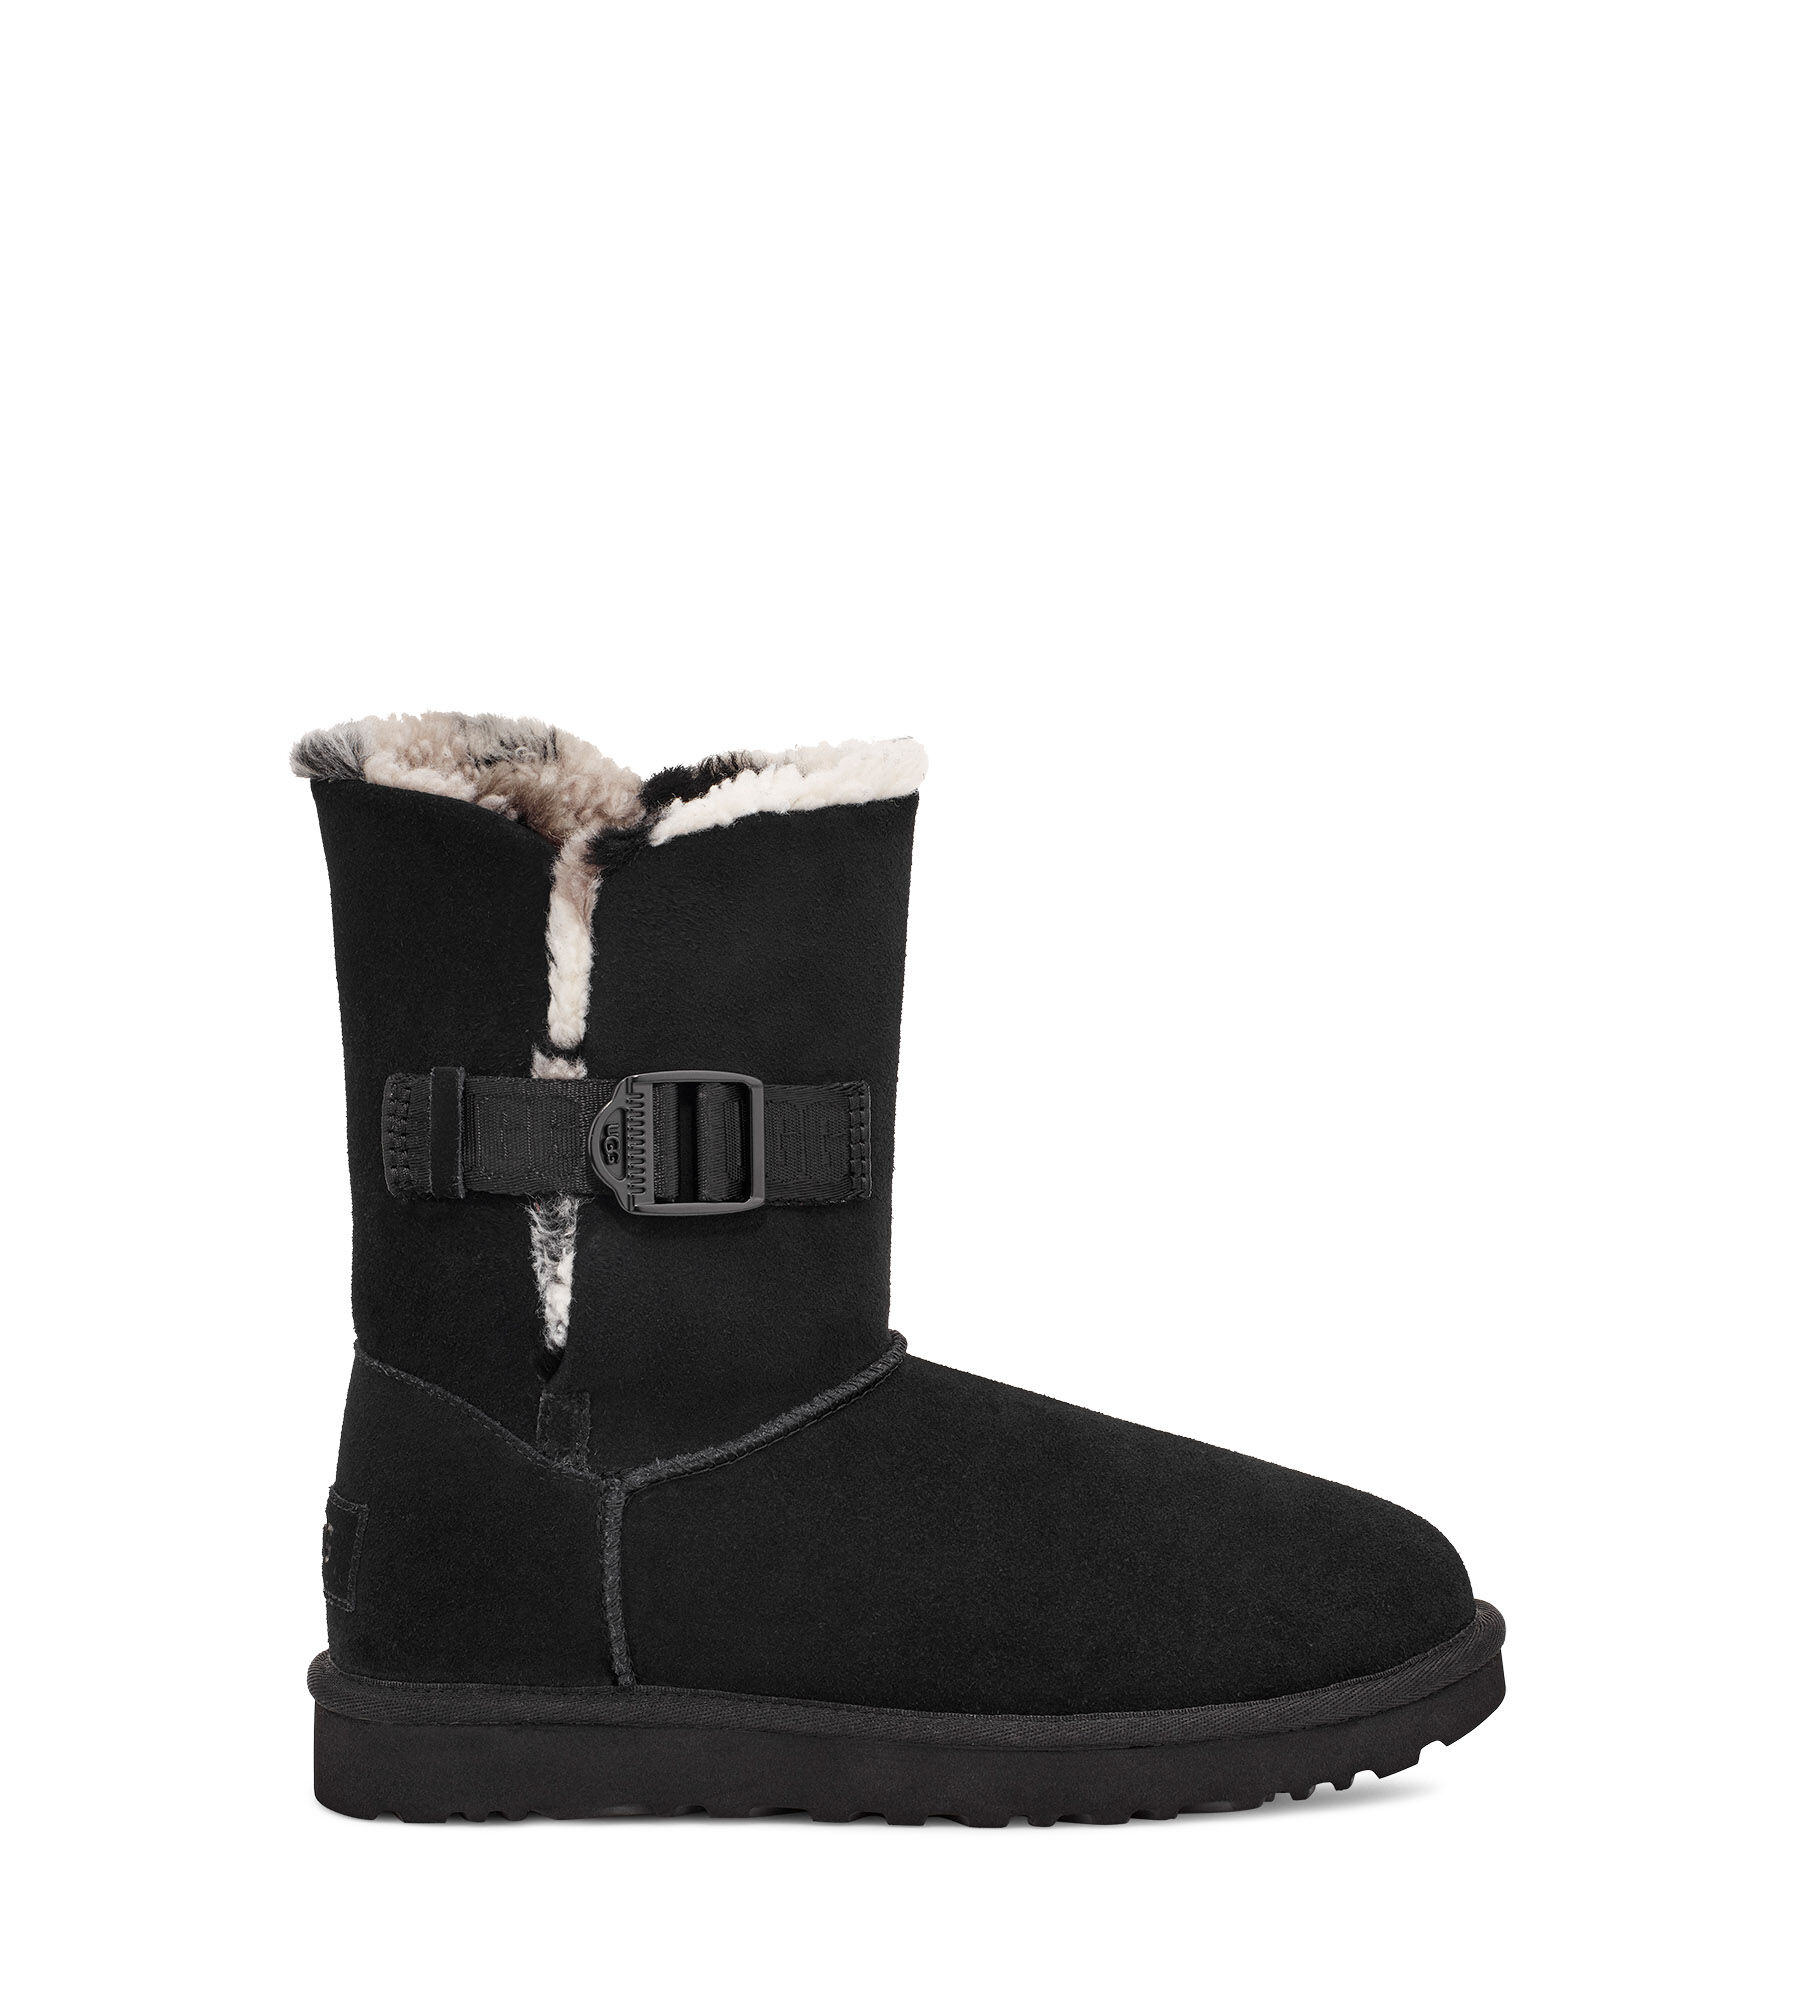 ugg boots womens sale